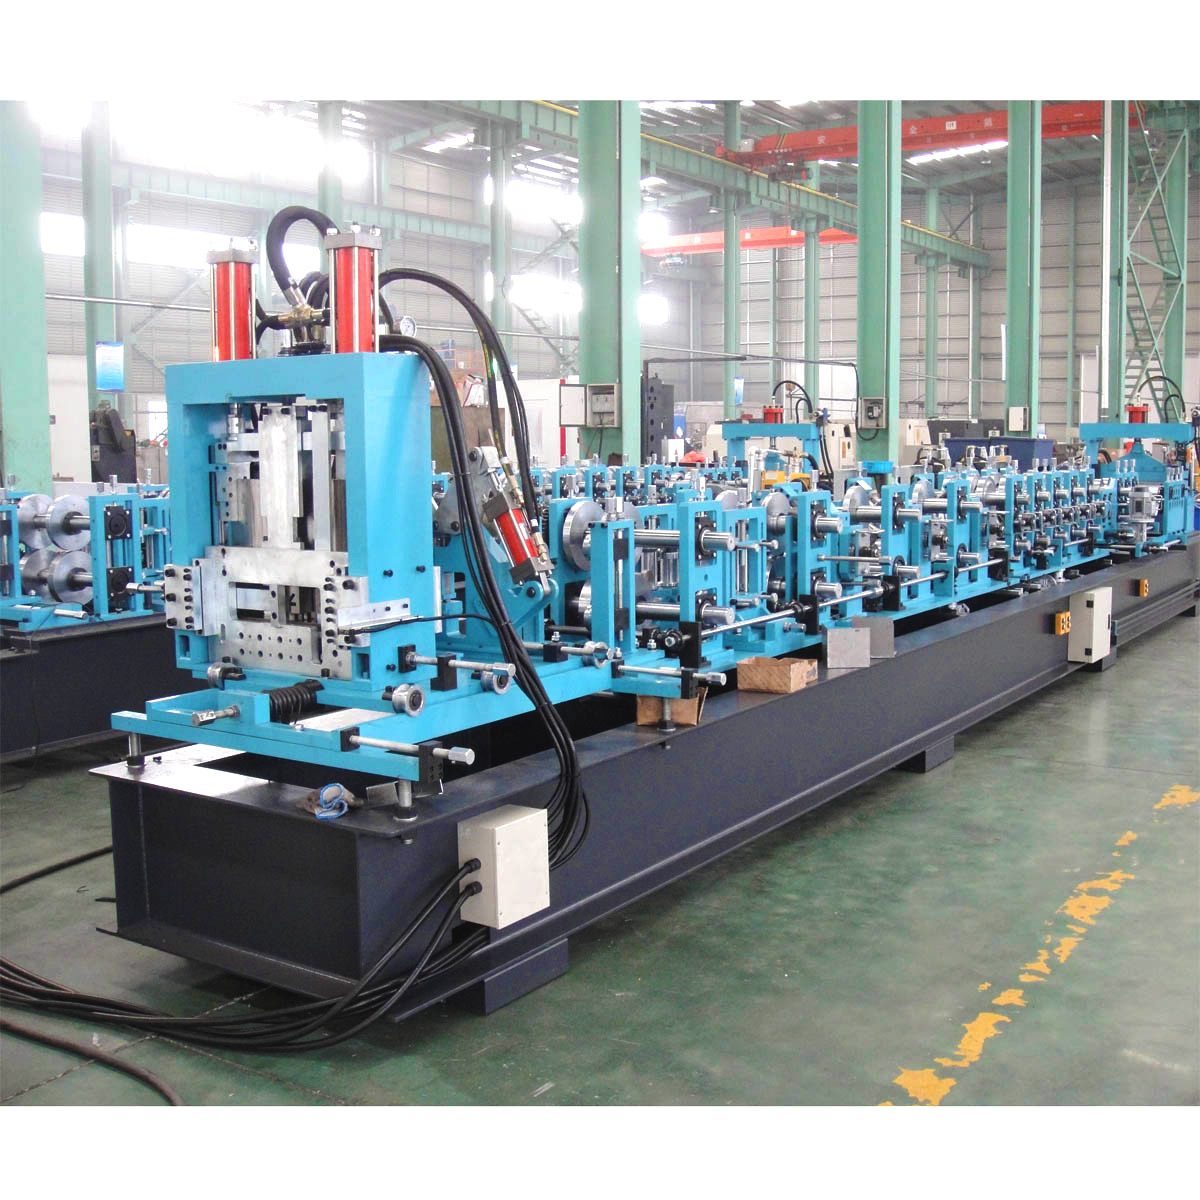 C Z Purin Roll Forming Machine with Siemens System